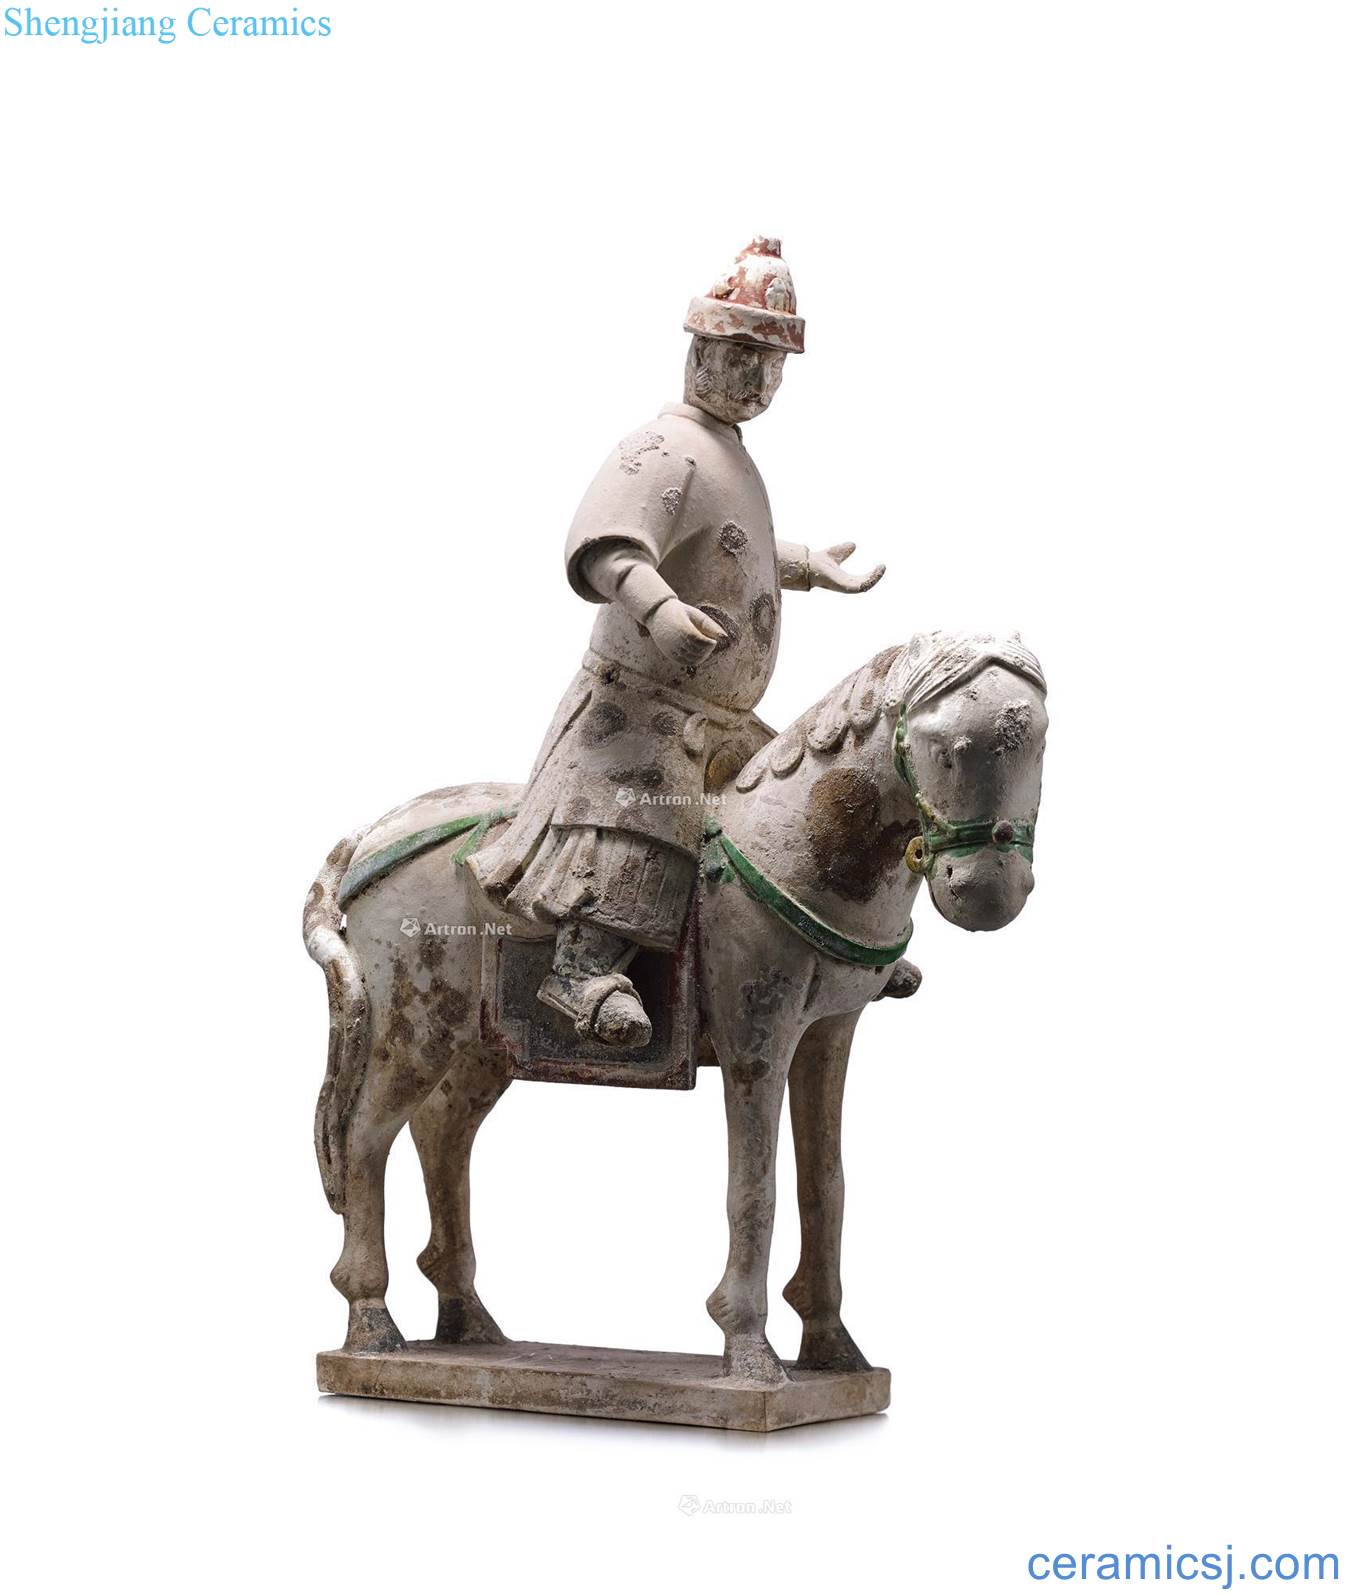 Early Ming dynasty pottery figurines on horseback